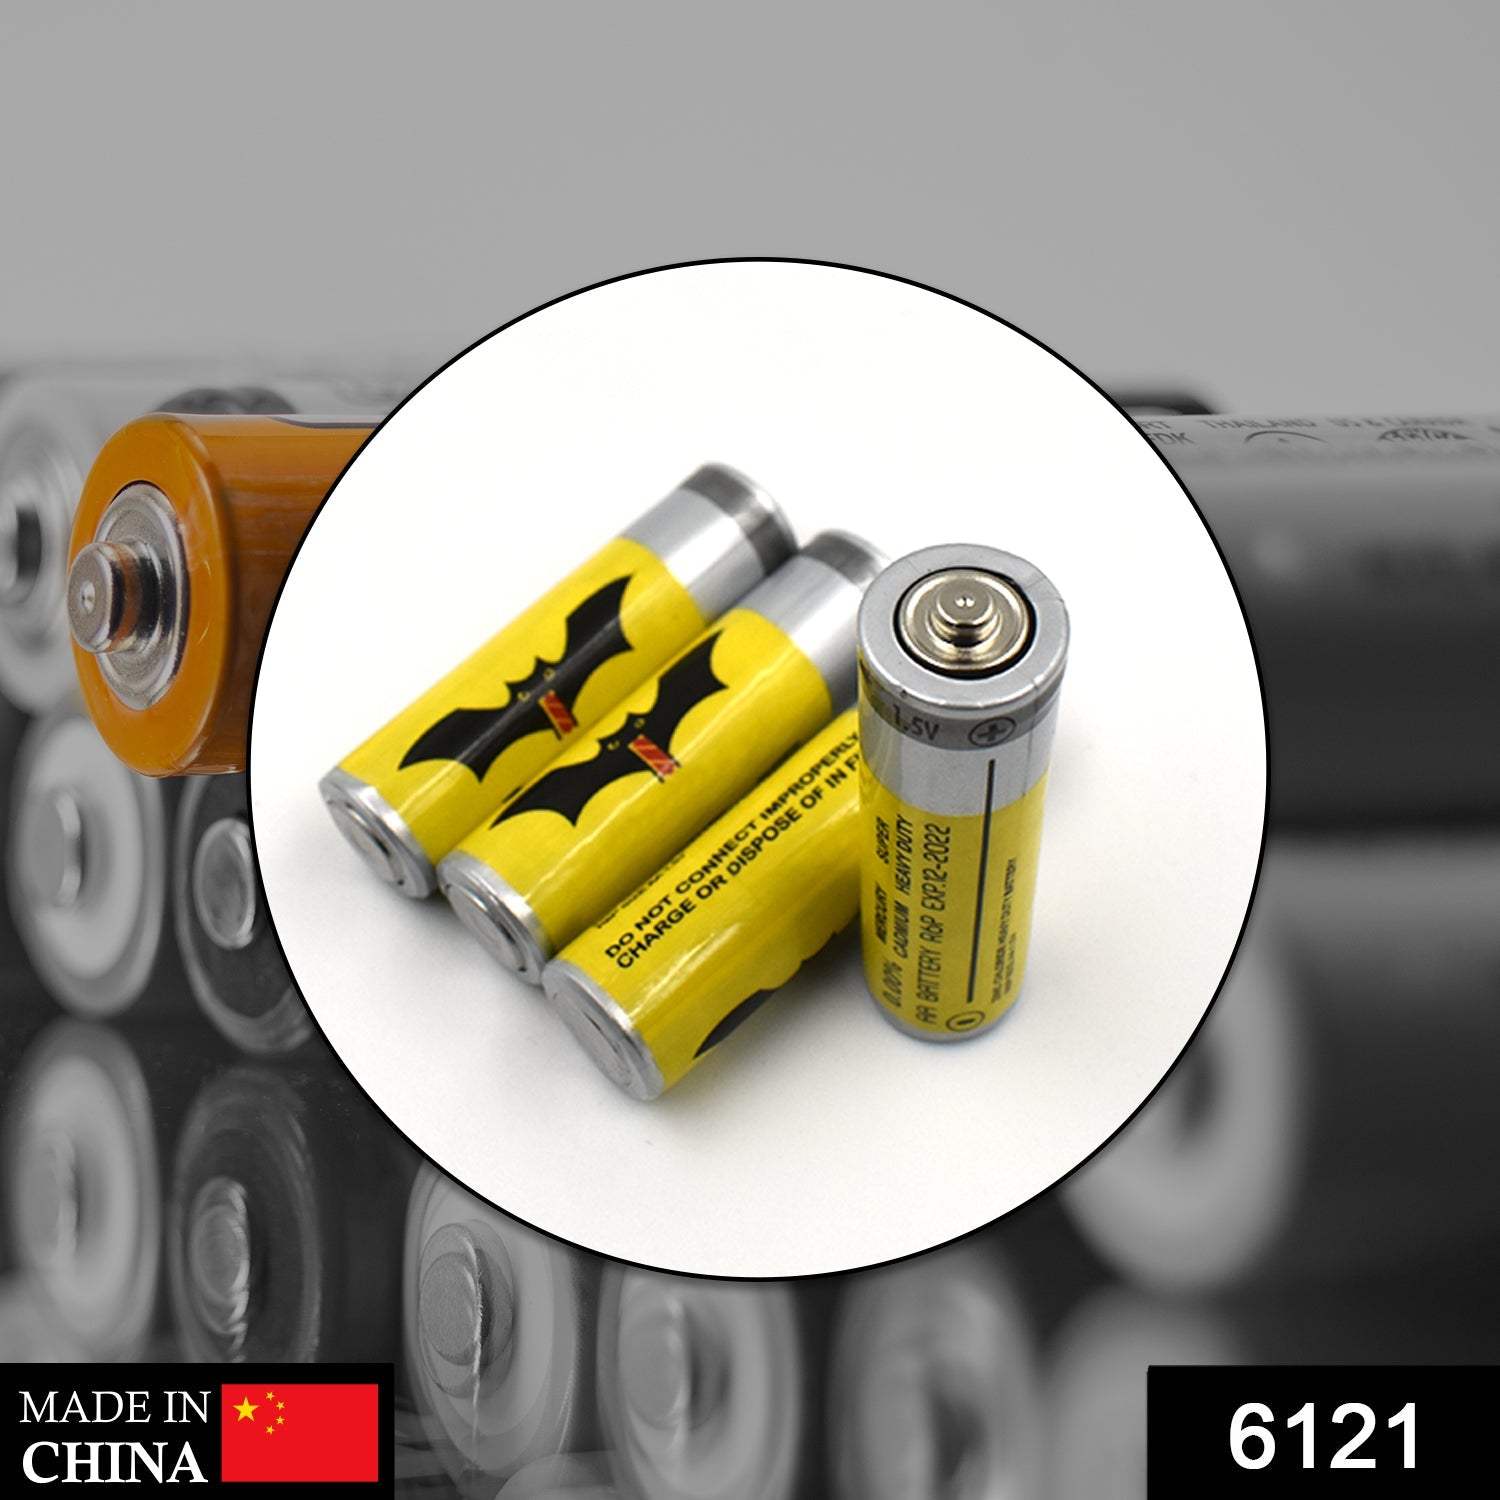 6121 4Pc AA Battery and power cells used in technical devices such as T.V remote, torch etc for their functioning. 